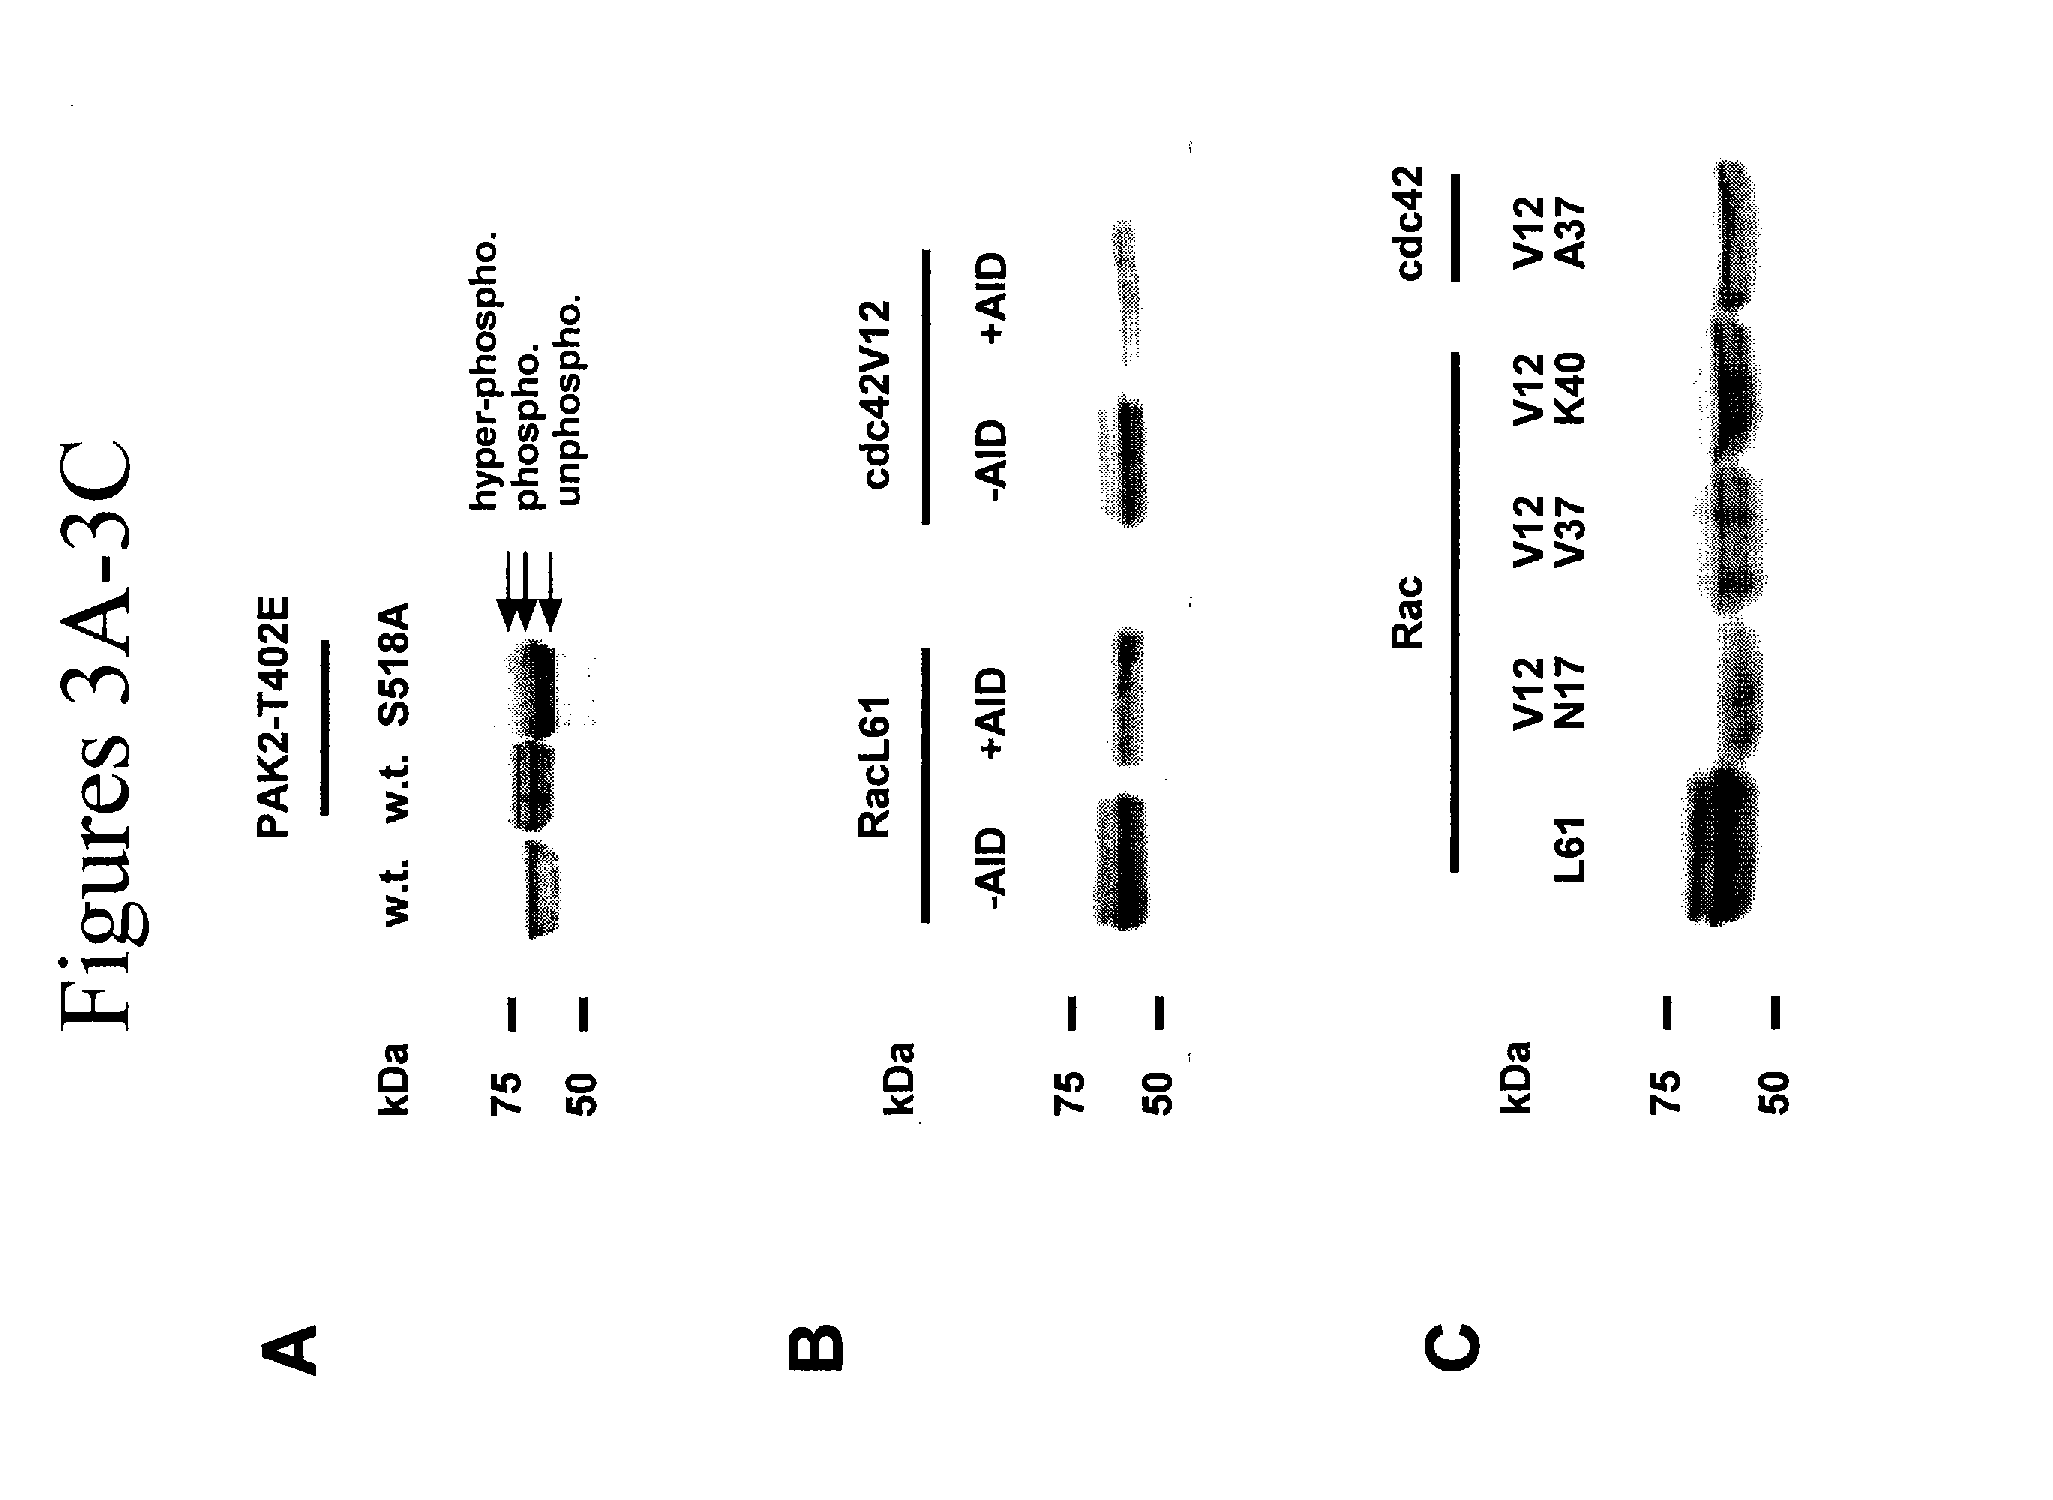 Methods for the treatment and prevention of cancer